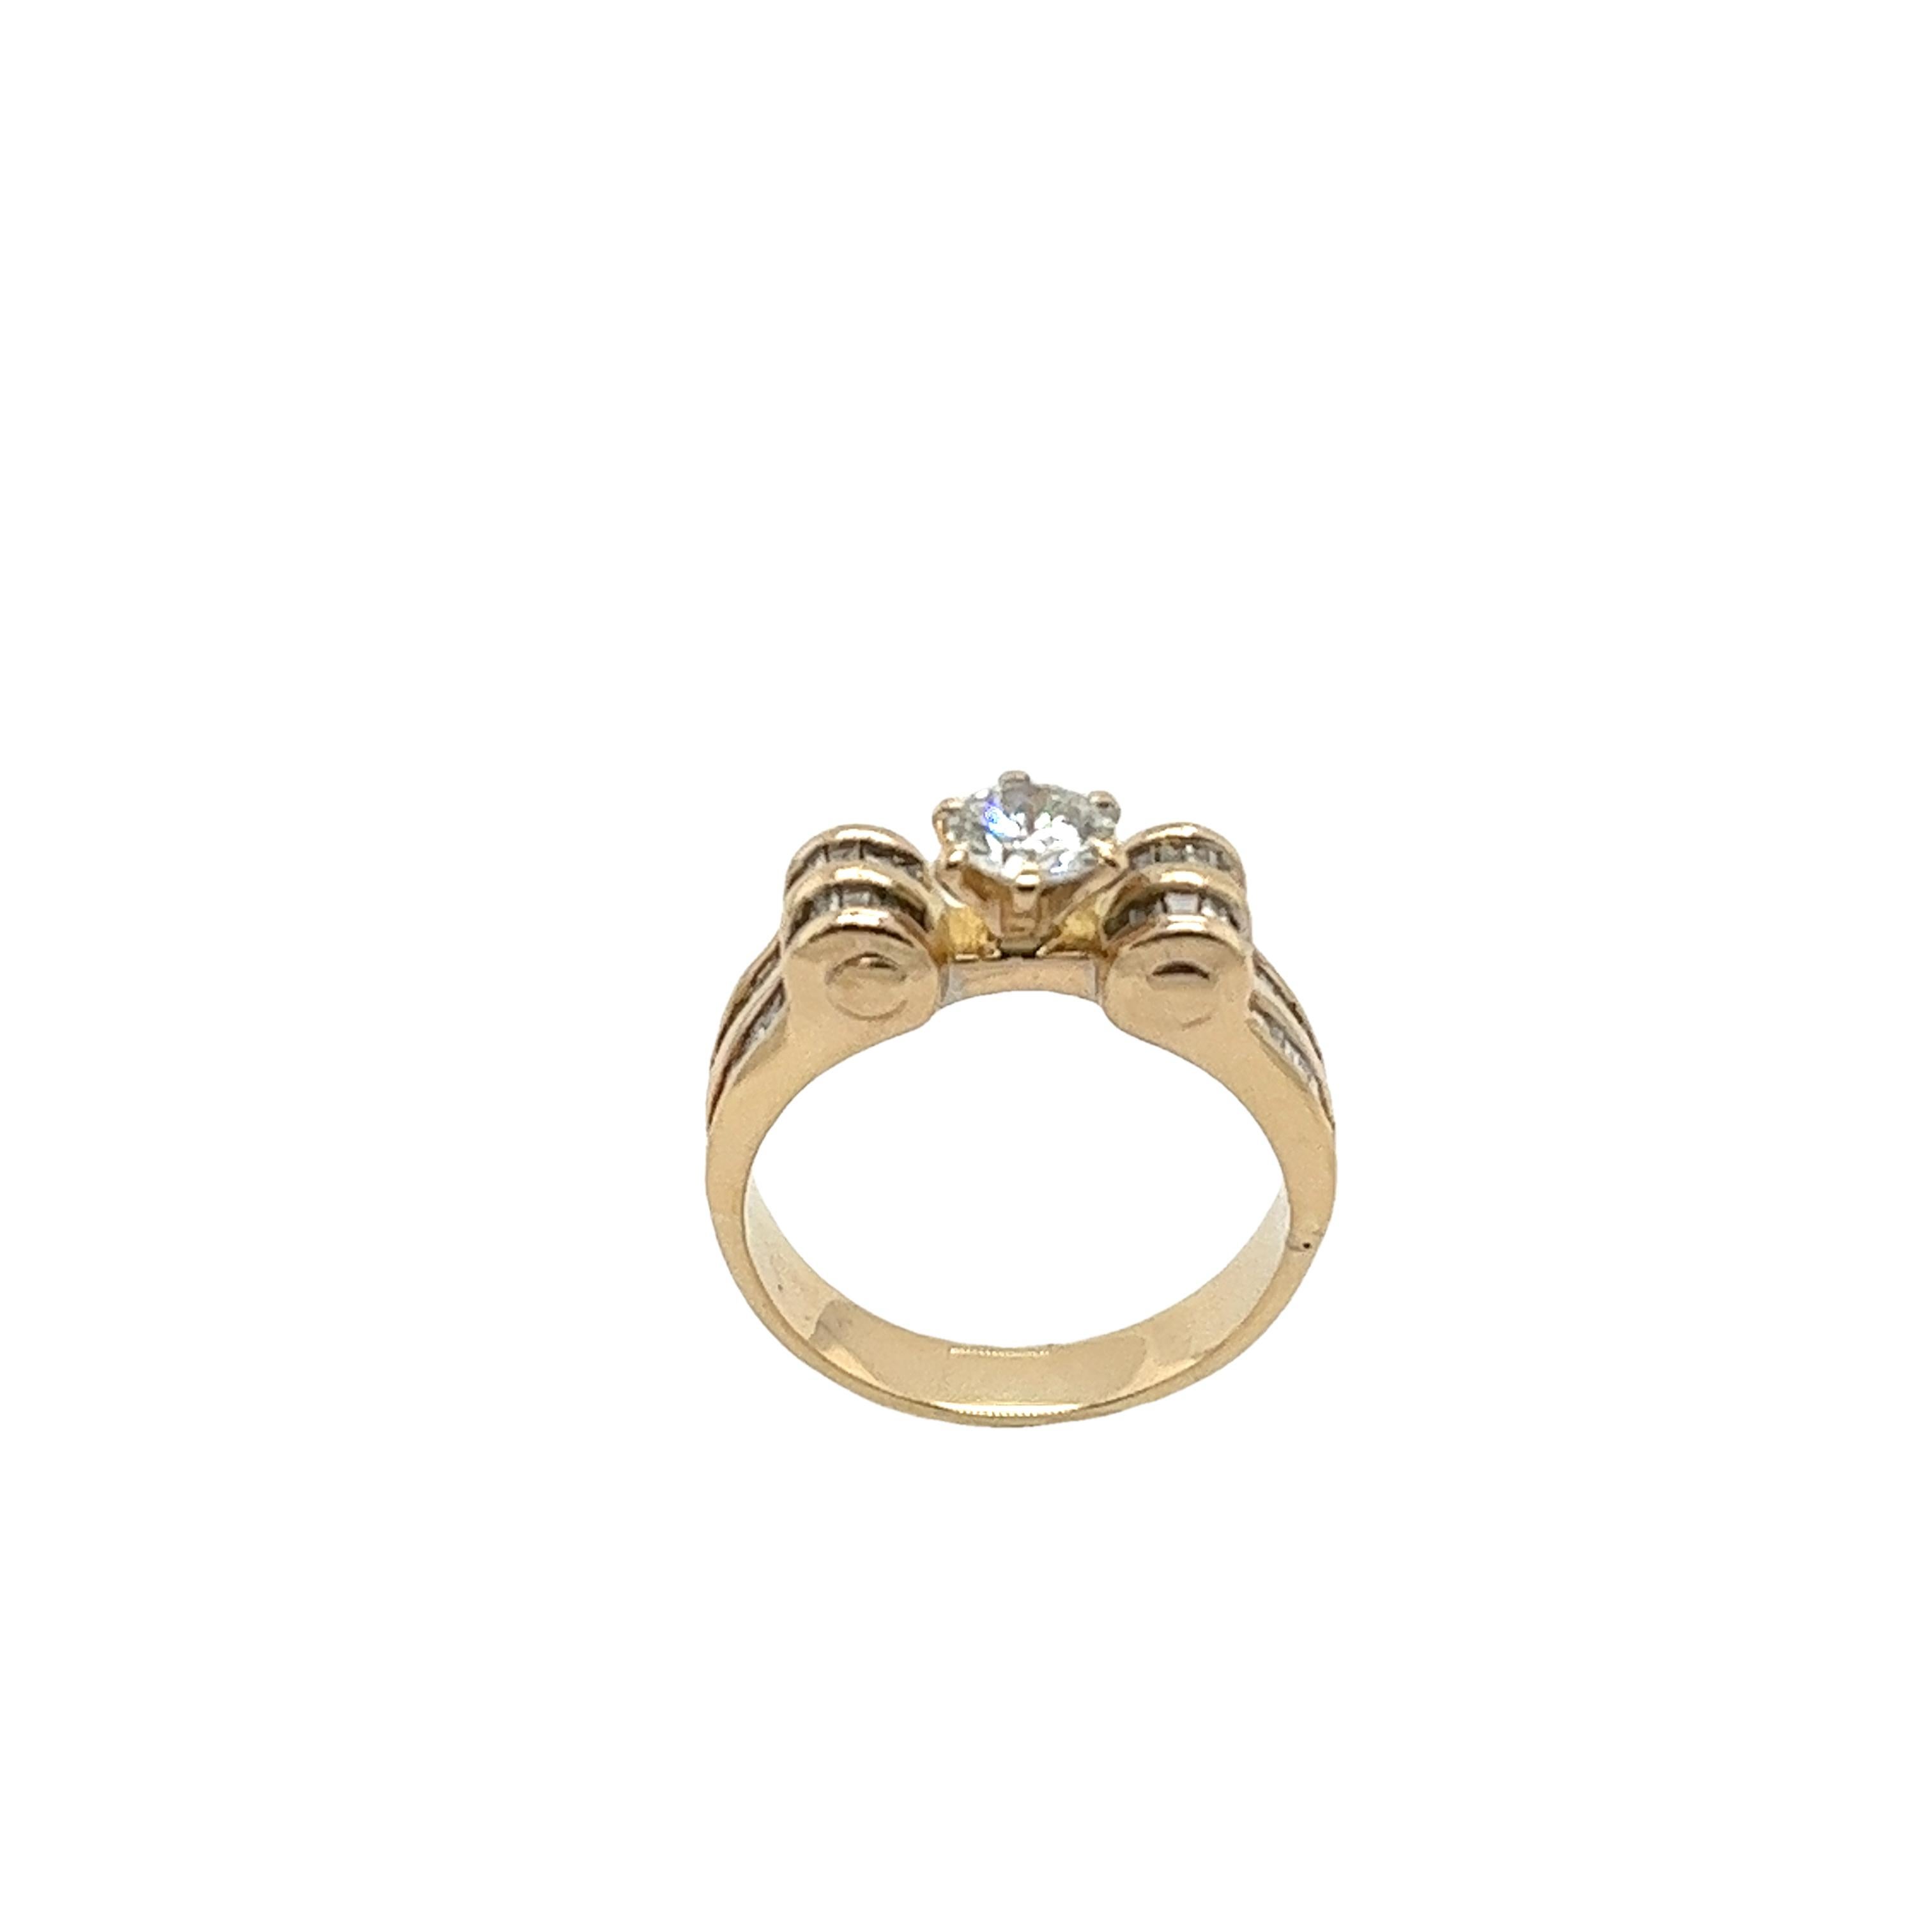 18ct Yellow Gold Diamond Solitaire Ring Set With 0.58ct Round Diamond & 0.43ct For Sale 1